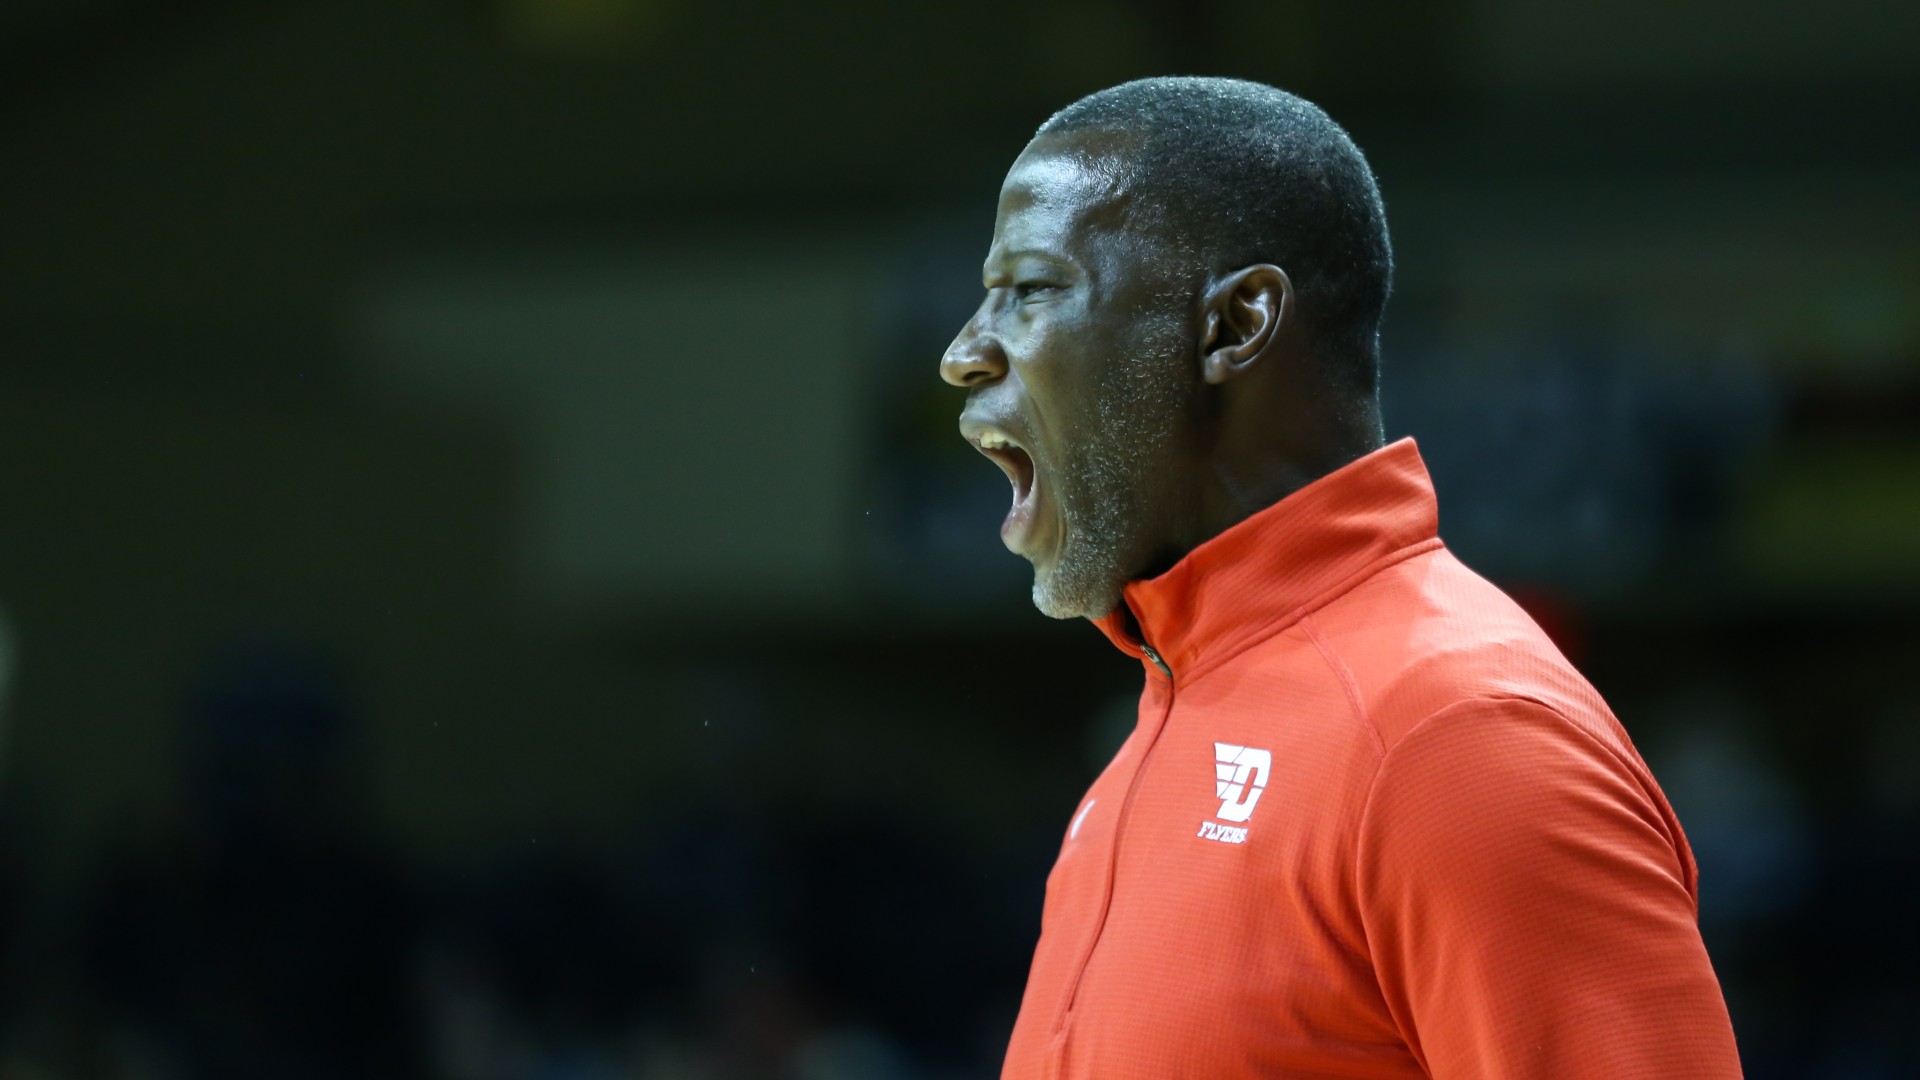 Dayton vs. Vanderbilt Odds & Picks for NIT: Is the Wrong Team Favored in This Second-Round Clash? article feature image